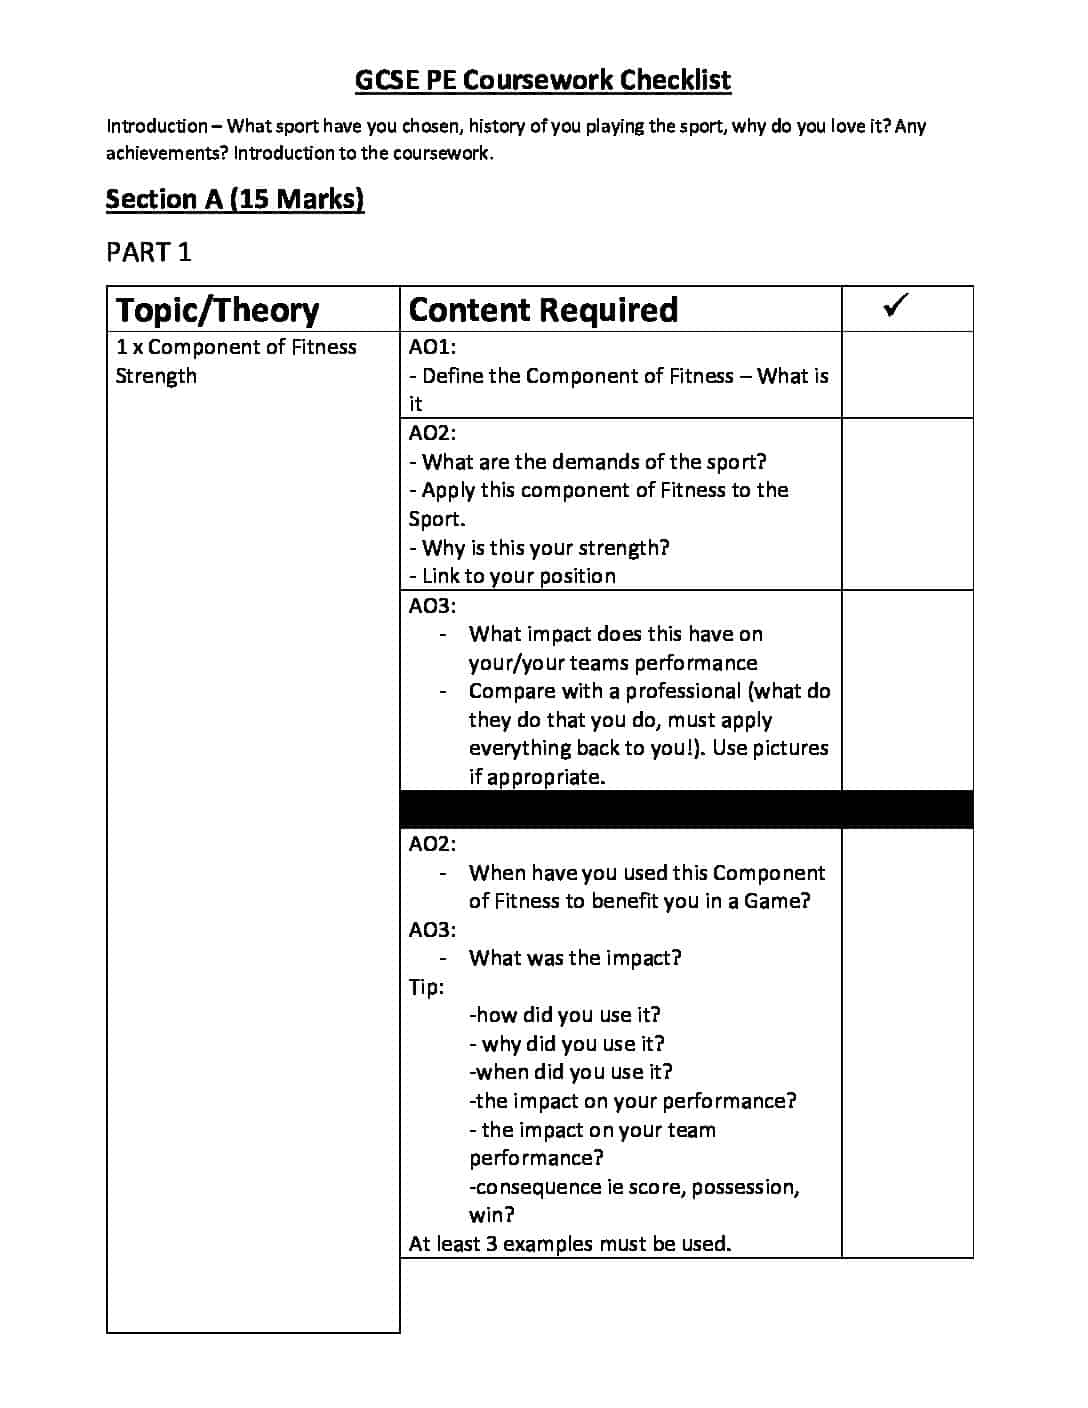 GCSE PE Coursework Checklists for Students